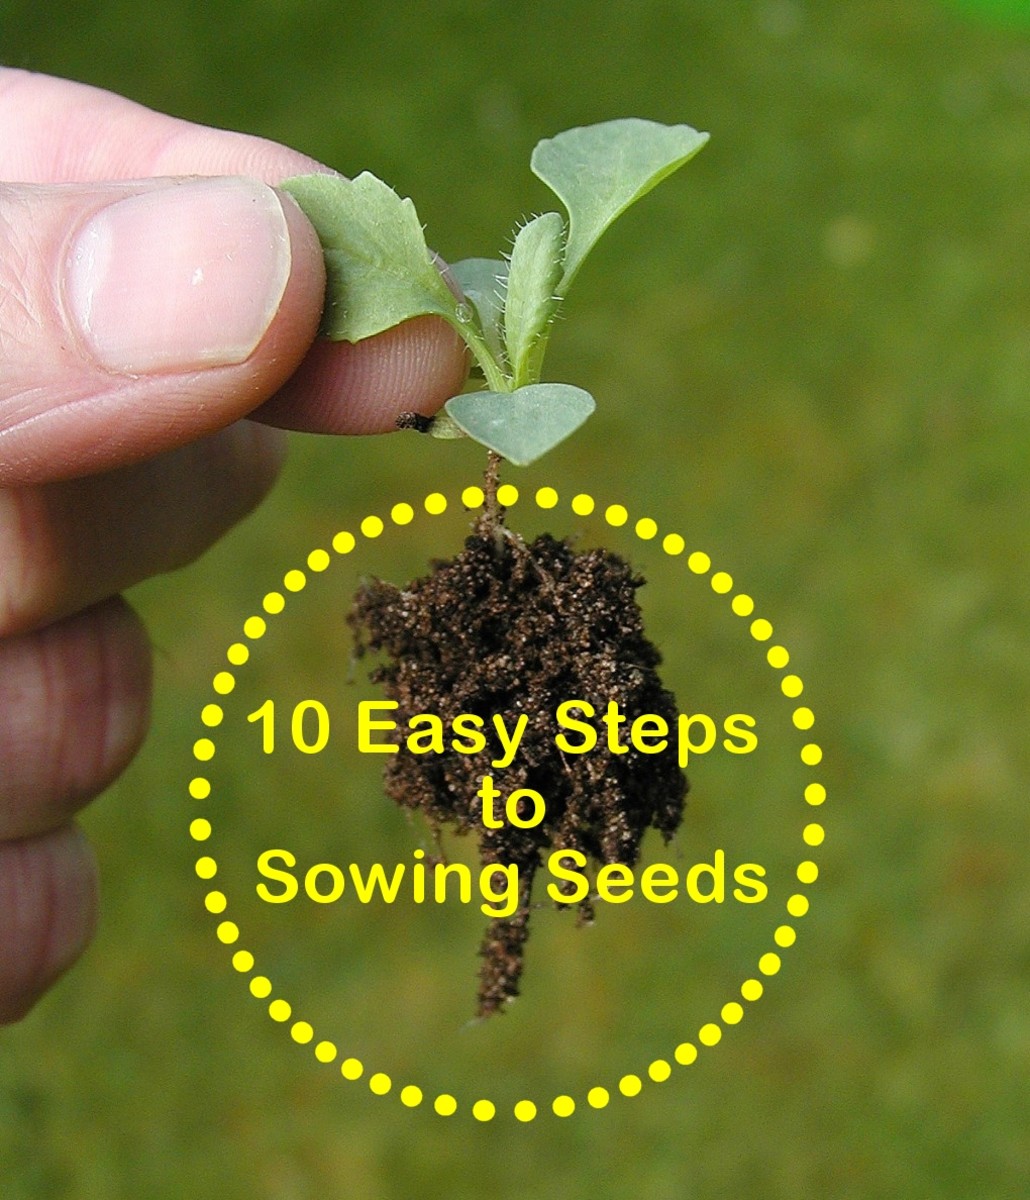 gardening for beginners: 10 easy steps to sowing seeds | dengarden